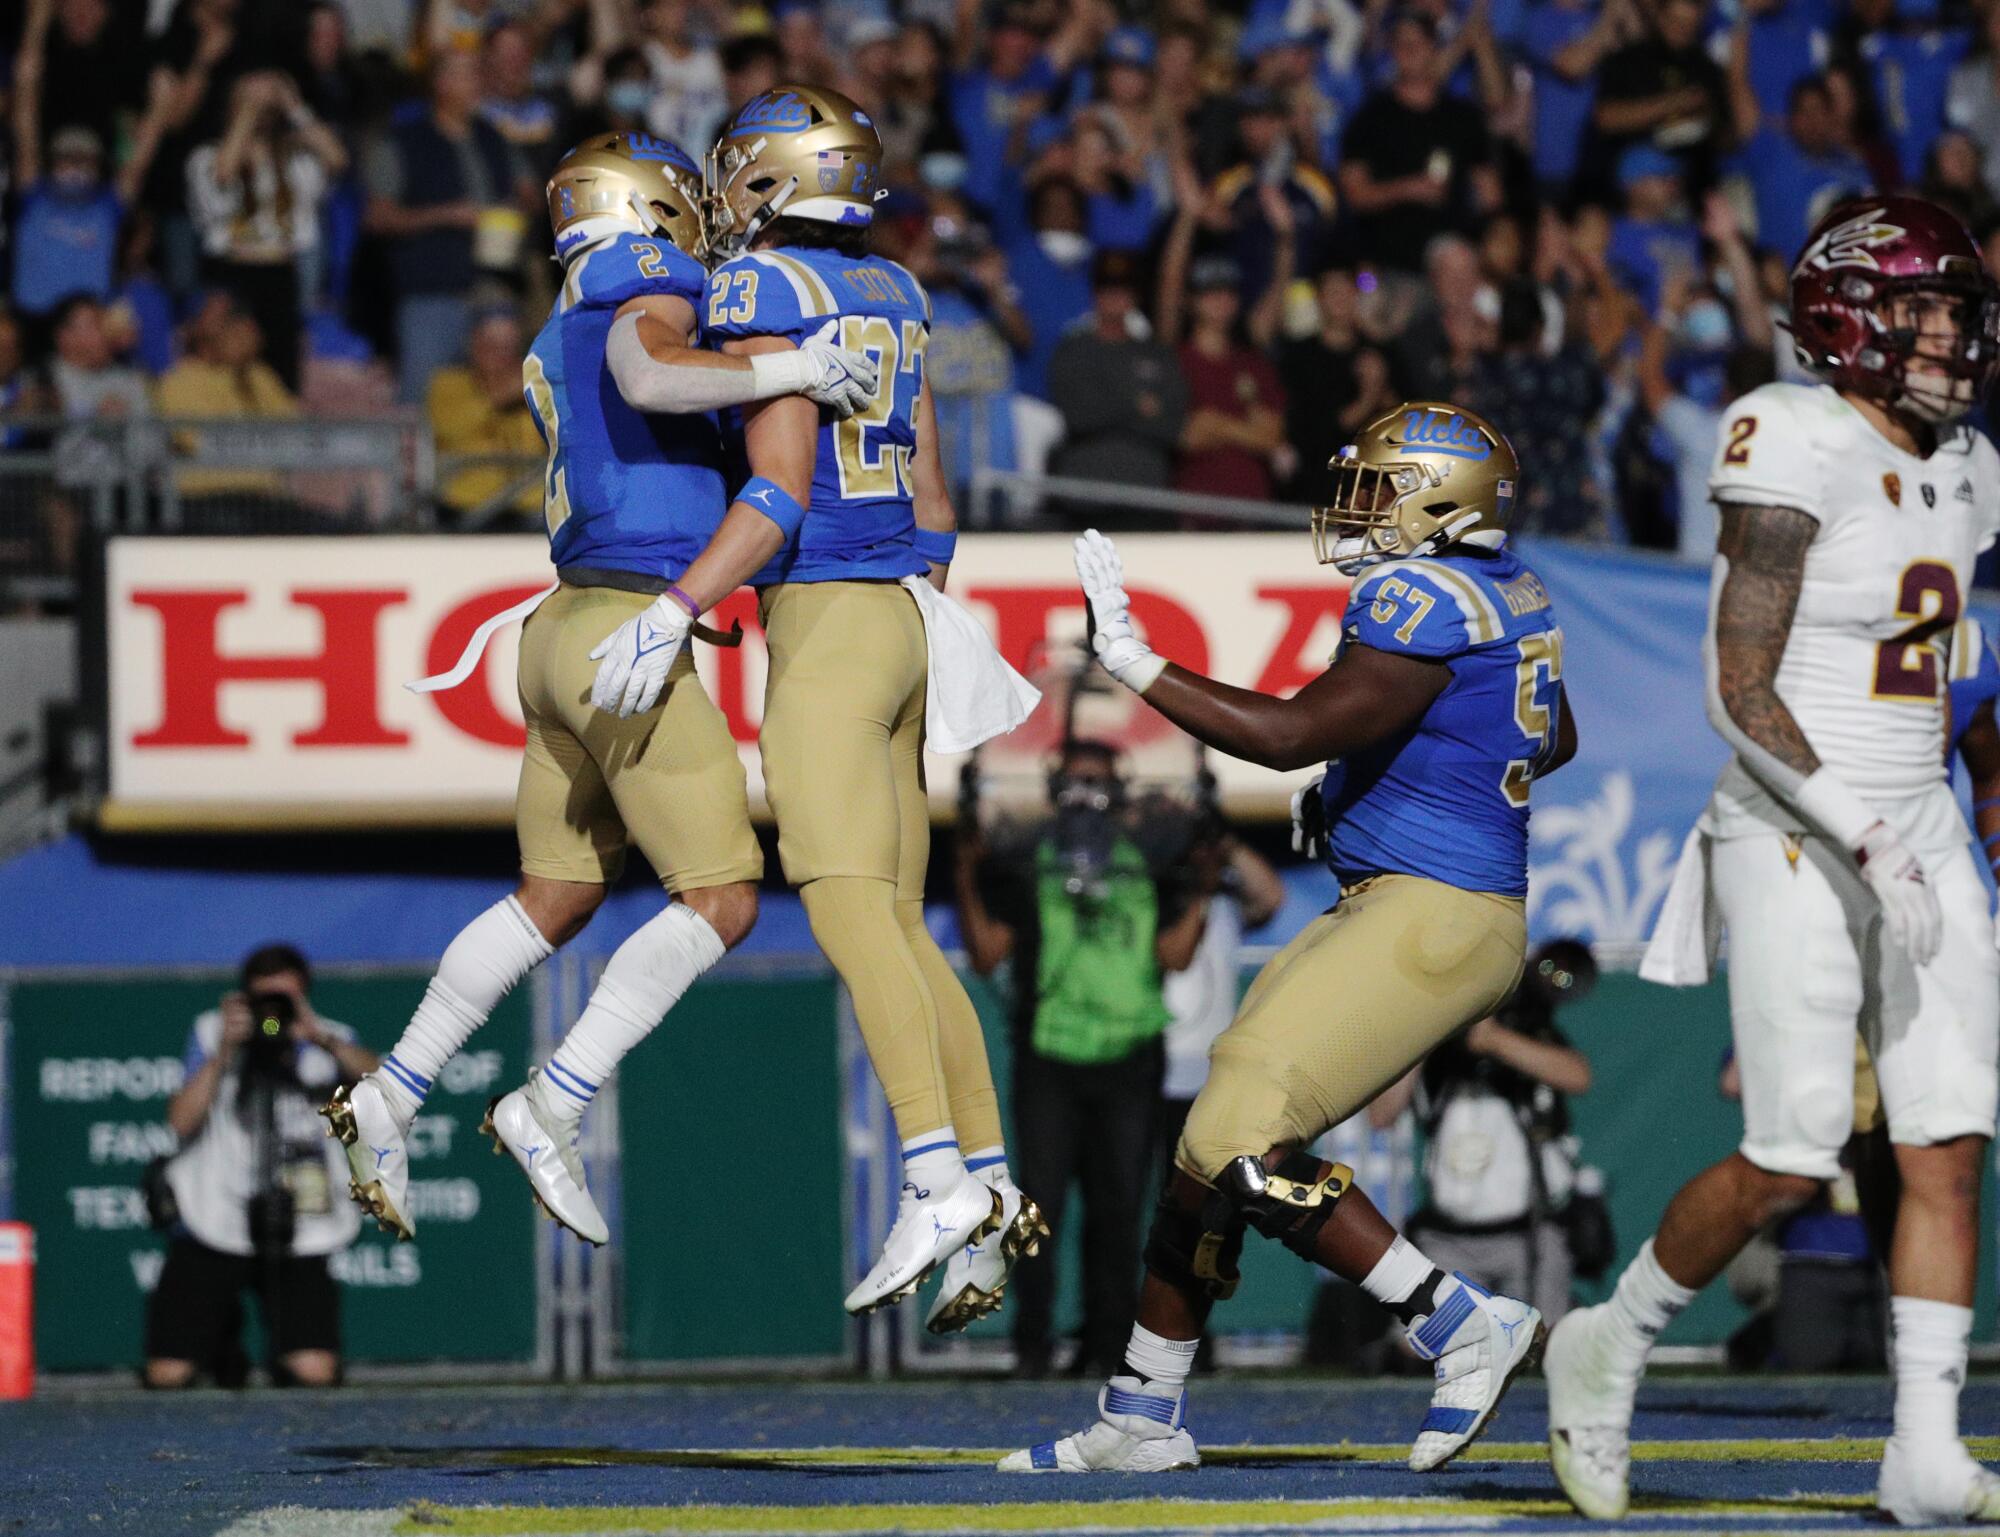 UCLA wide receiver Kyle Philips celebrates his touchdown catch with teammate Chase Cota.